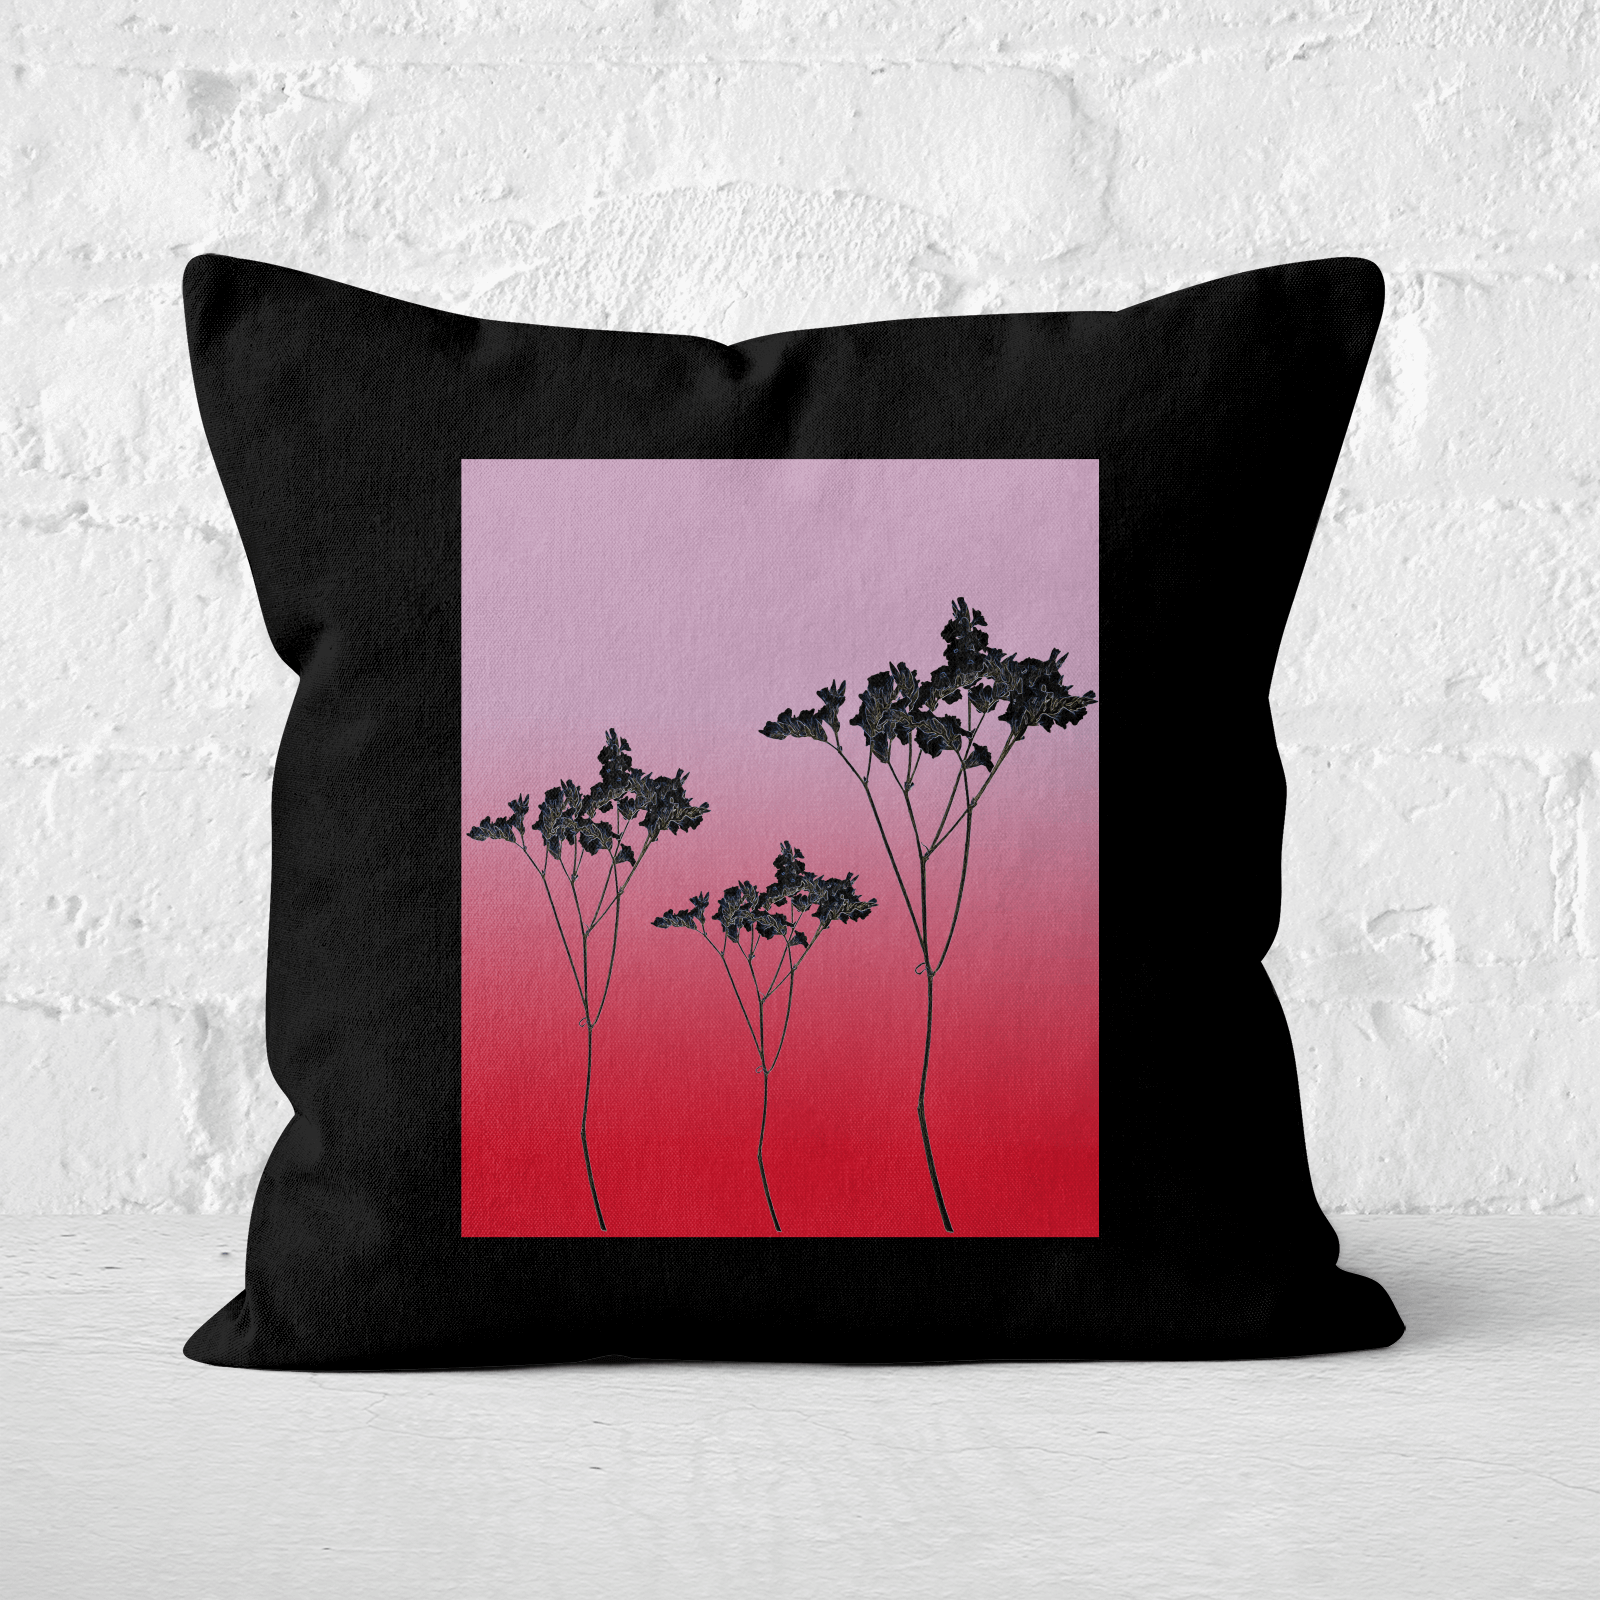 Pressed Flowers Ombre Sunset Flowers Square Cushion - 60x60cm - Soft Touch